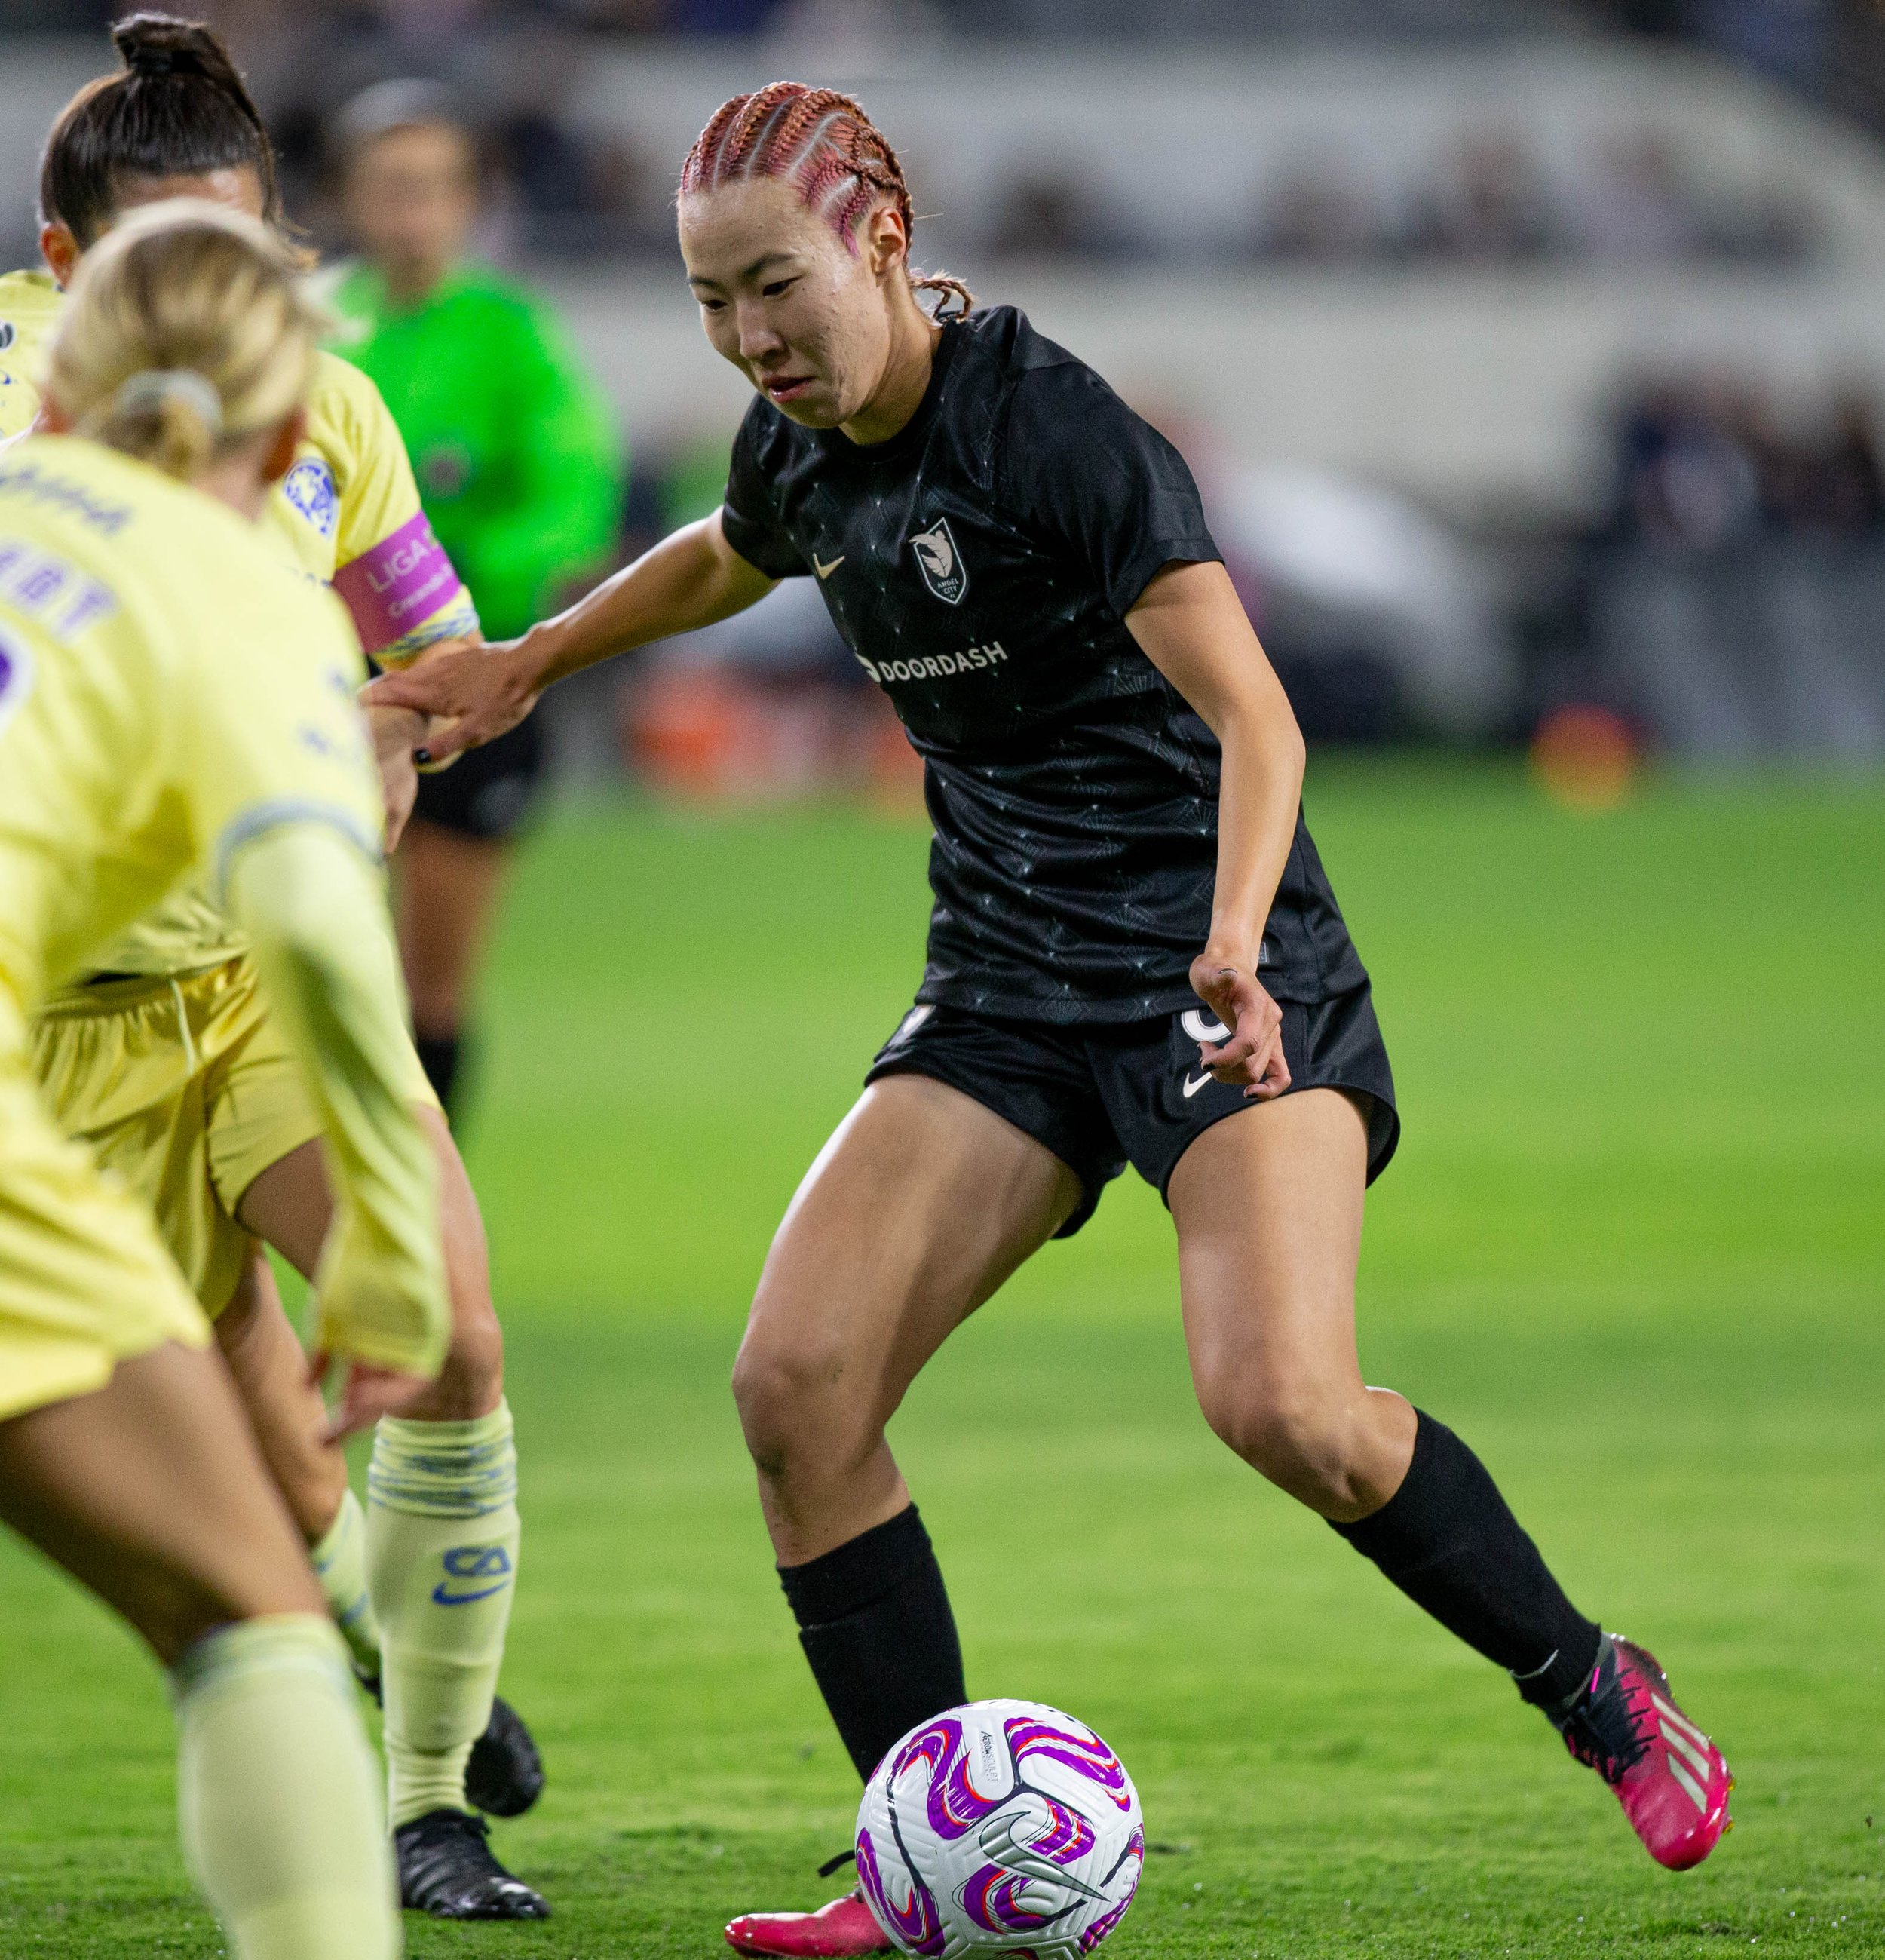  Jun Endo from Angel City FC attemepting to dribble past Club America Femenil captain, Andrea Pereira and midfielder, Sarah Luebbert during their international friendly on Wed. March 8, 2023 at BMO Stadium in Los Angeles, Calif. (Danilo Perez | The C